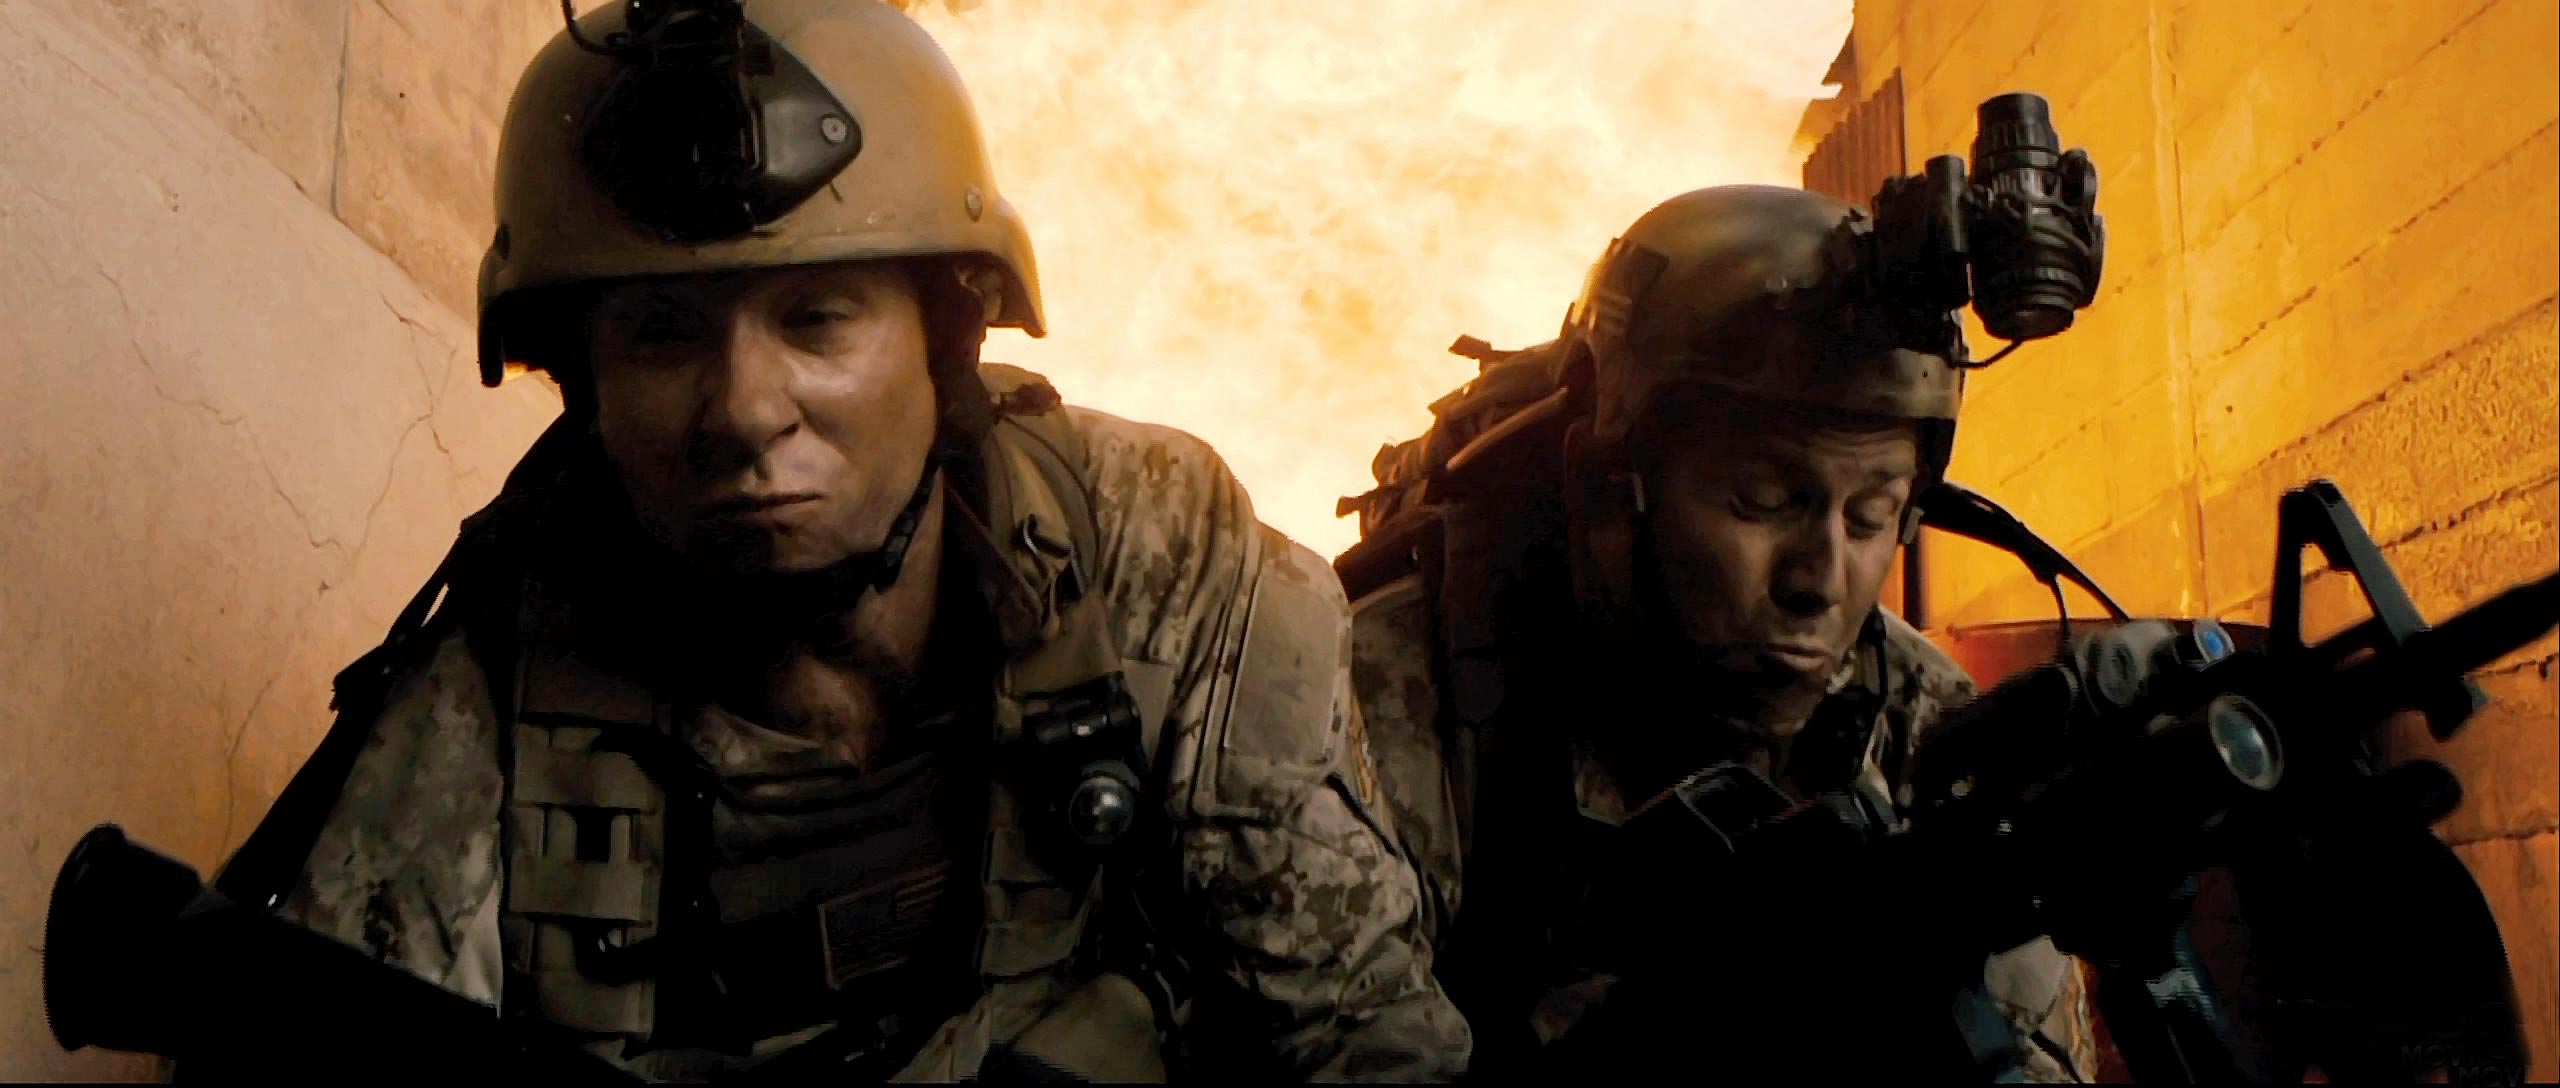 act of valor movie based on a true story